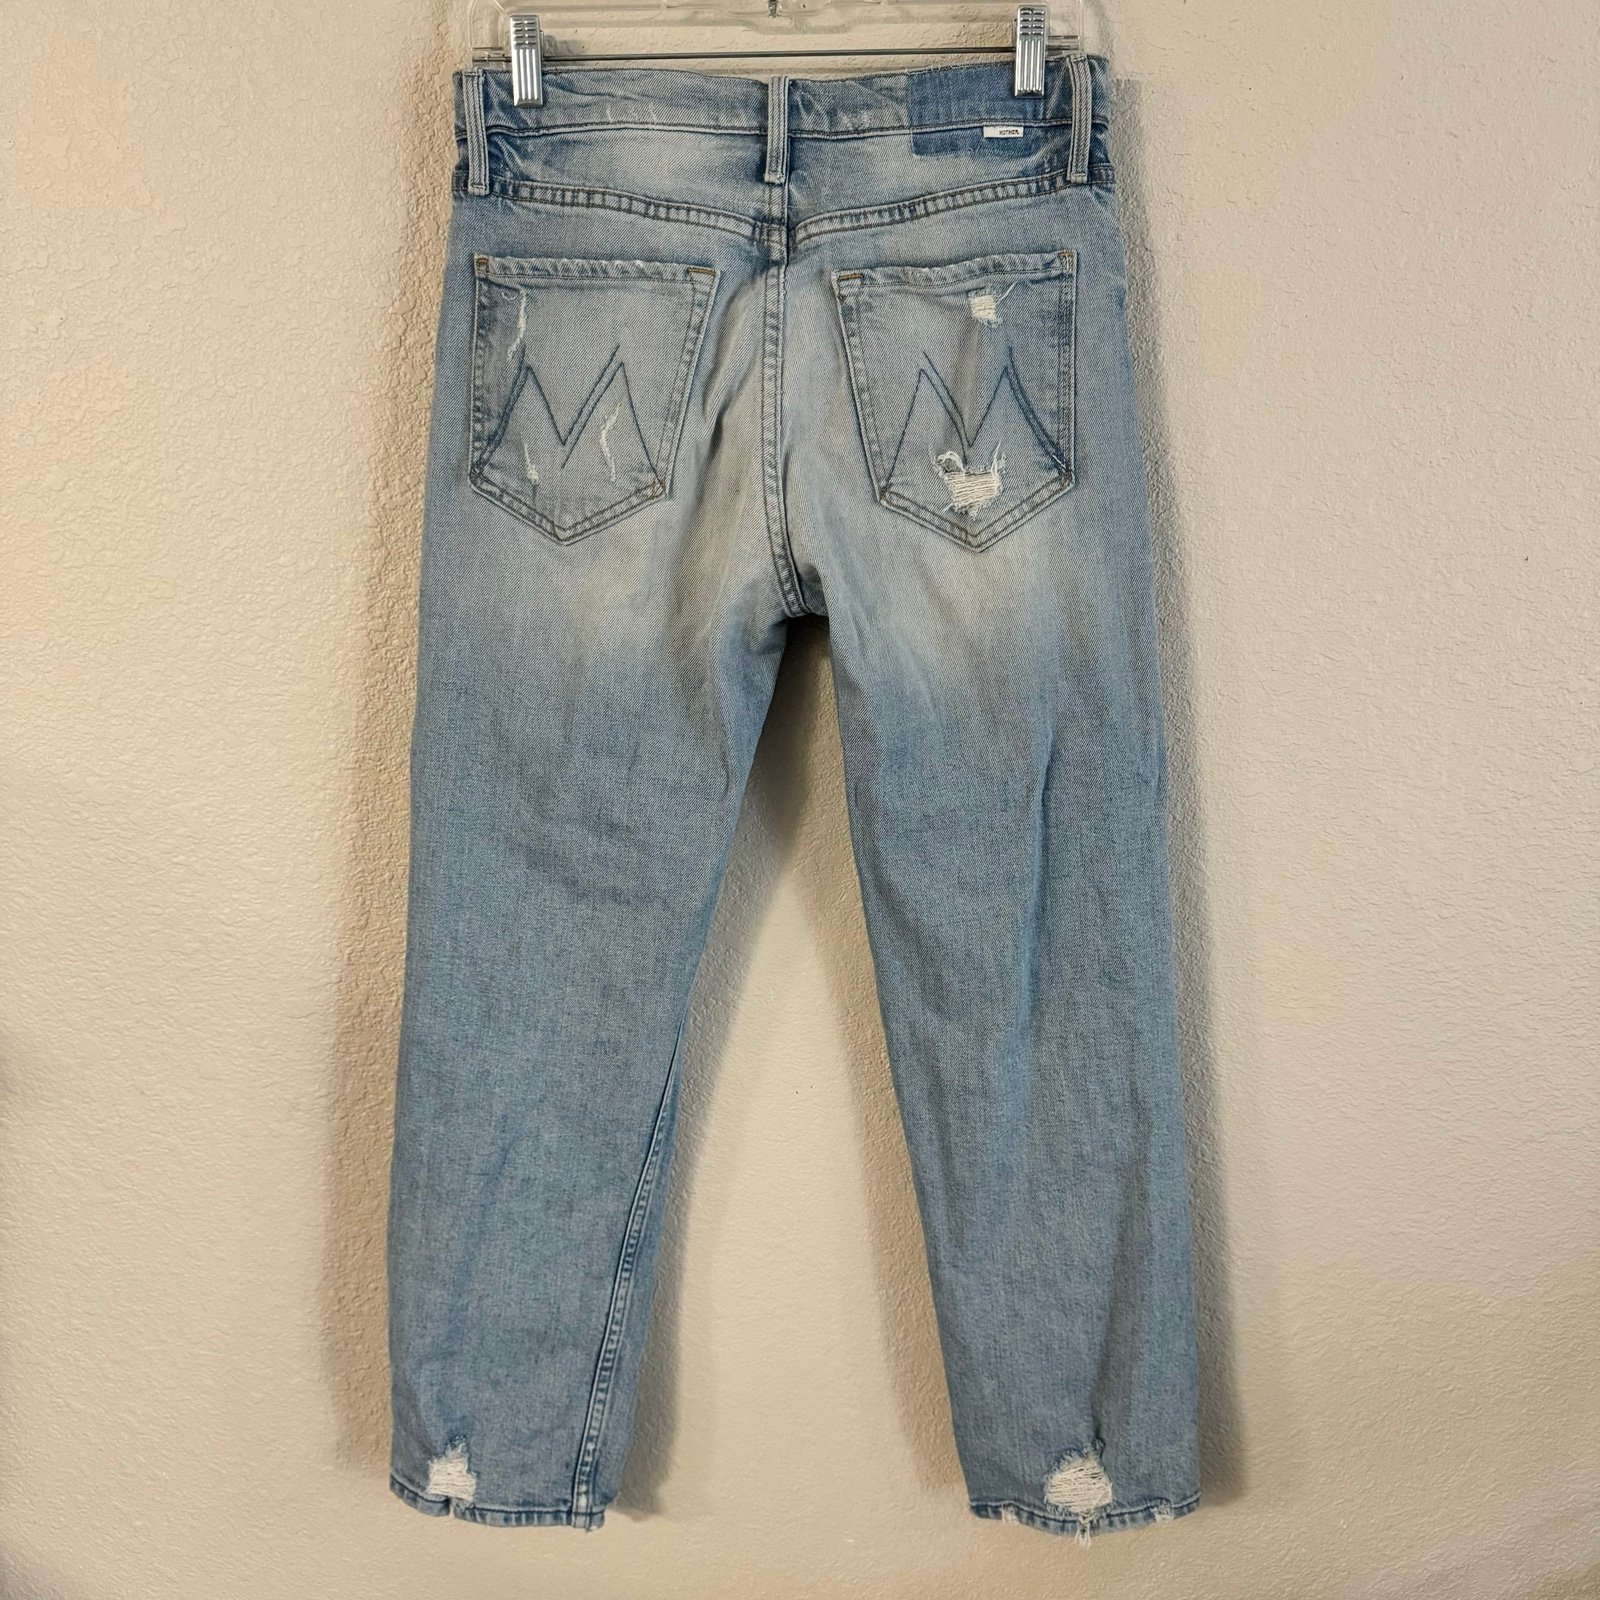 Custom Mother Womens The Tomcat in The Confession Distressed Denim Jeans High Rise 28 J4W1SF69Q Buying Cheap